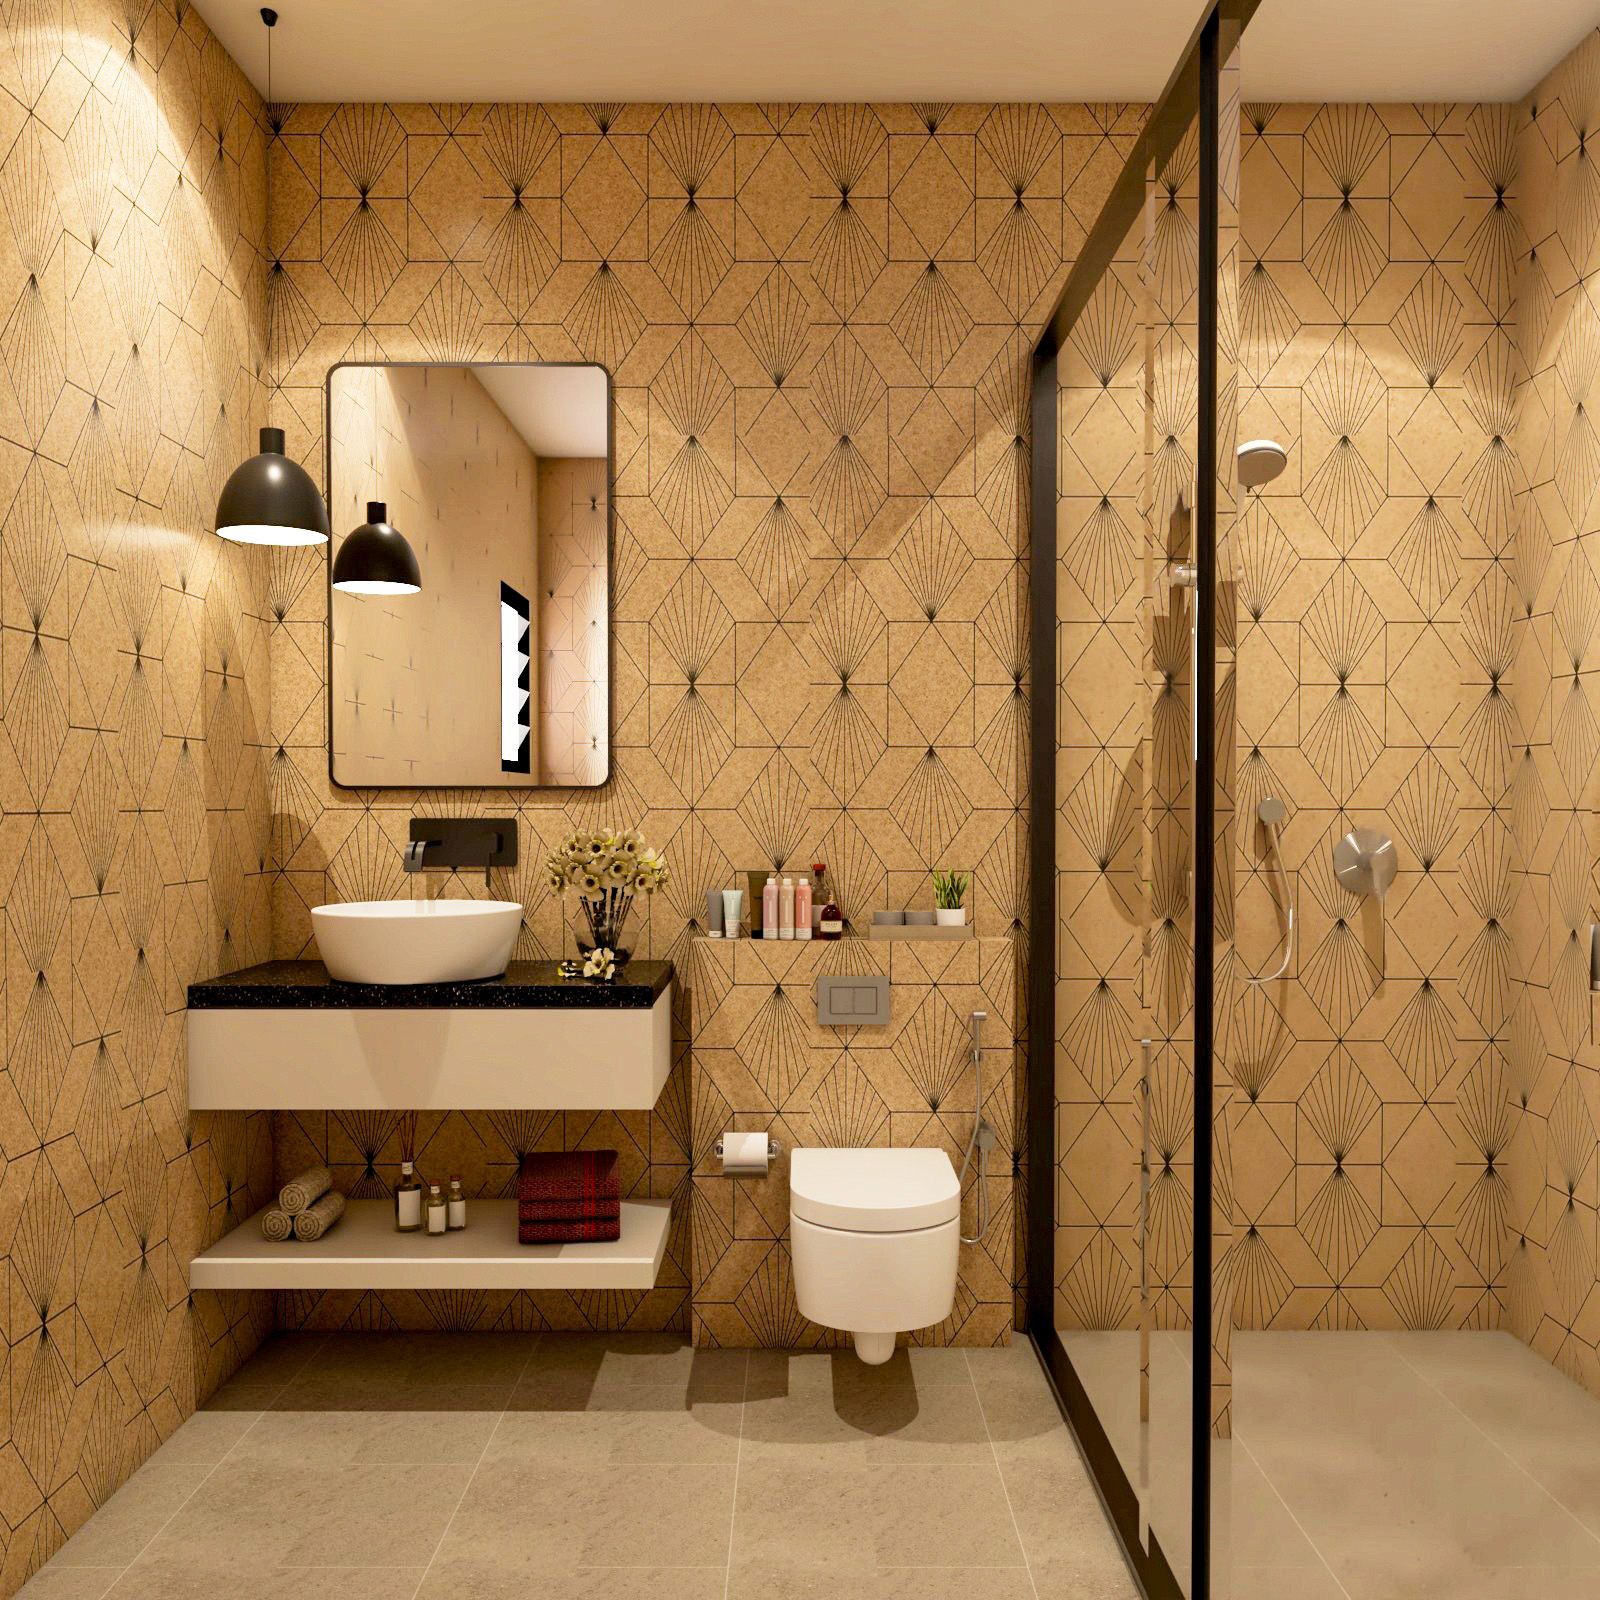 Modern Small Bathroom Design With Brown Bathroom Tiles And White Bathroom Cabinet Storage